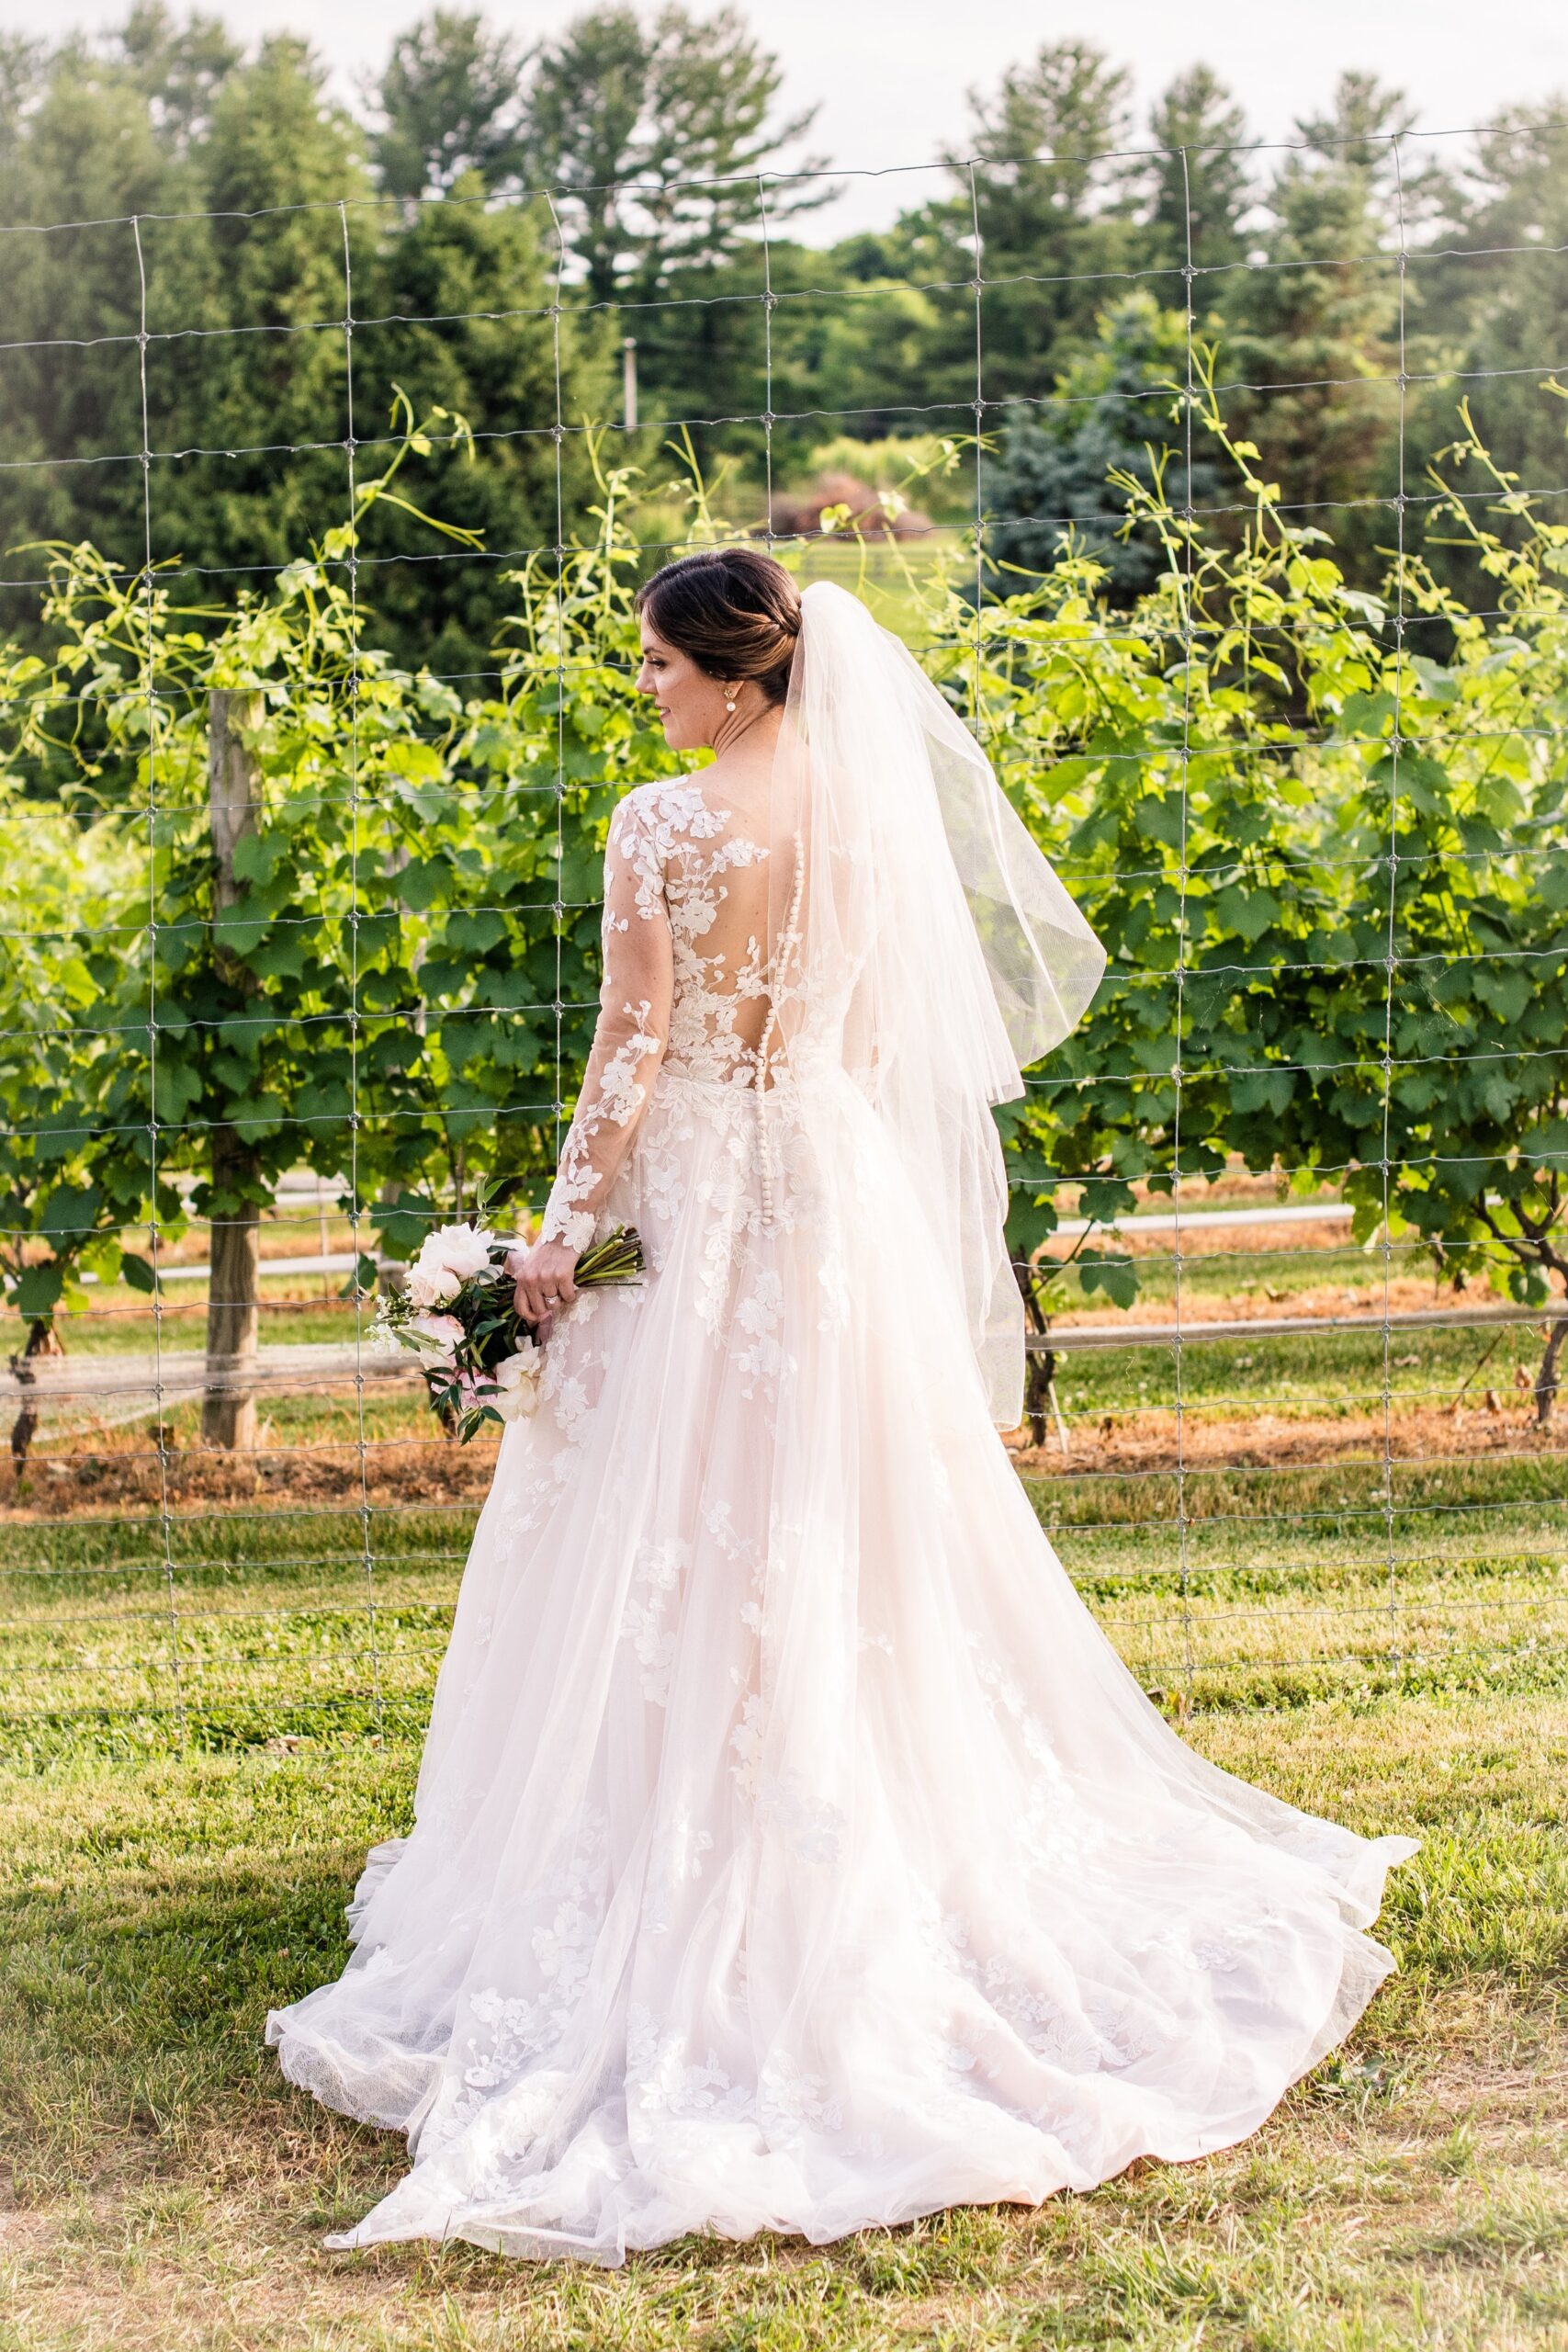 A bride showing off the back of her dress in the vineyards during her wedding at one of the best wedding venues in Northern Virginia